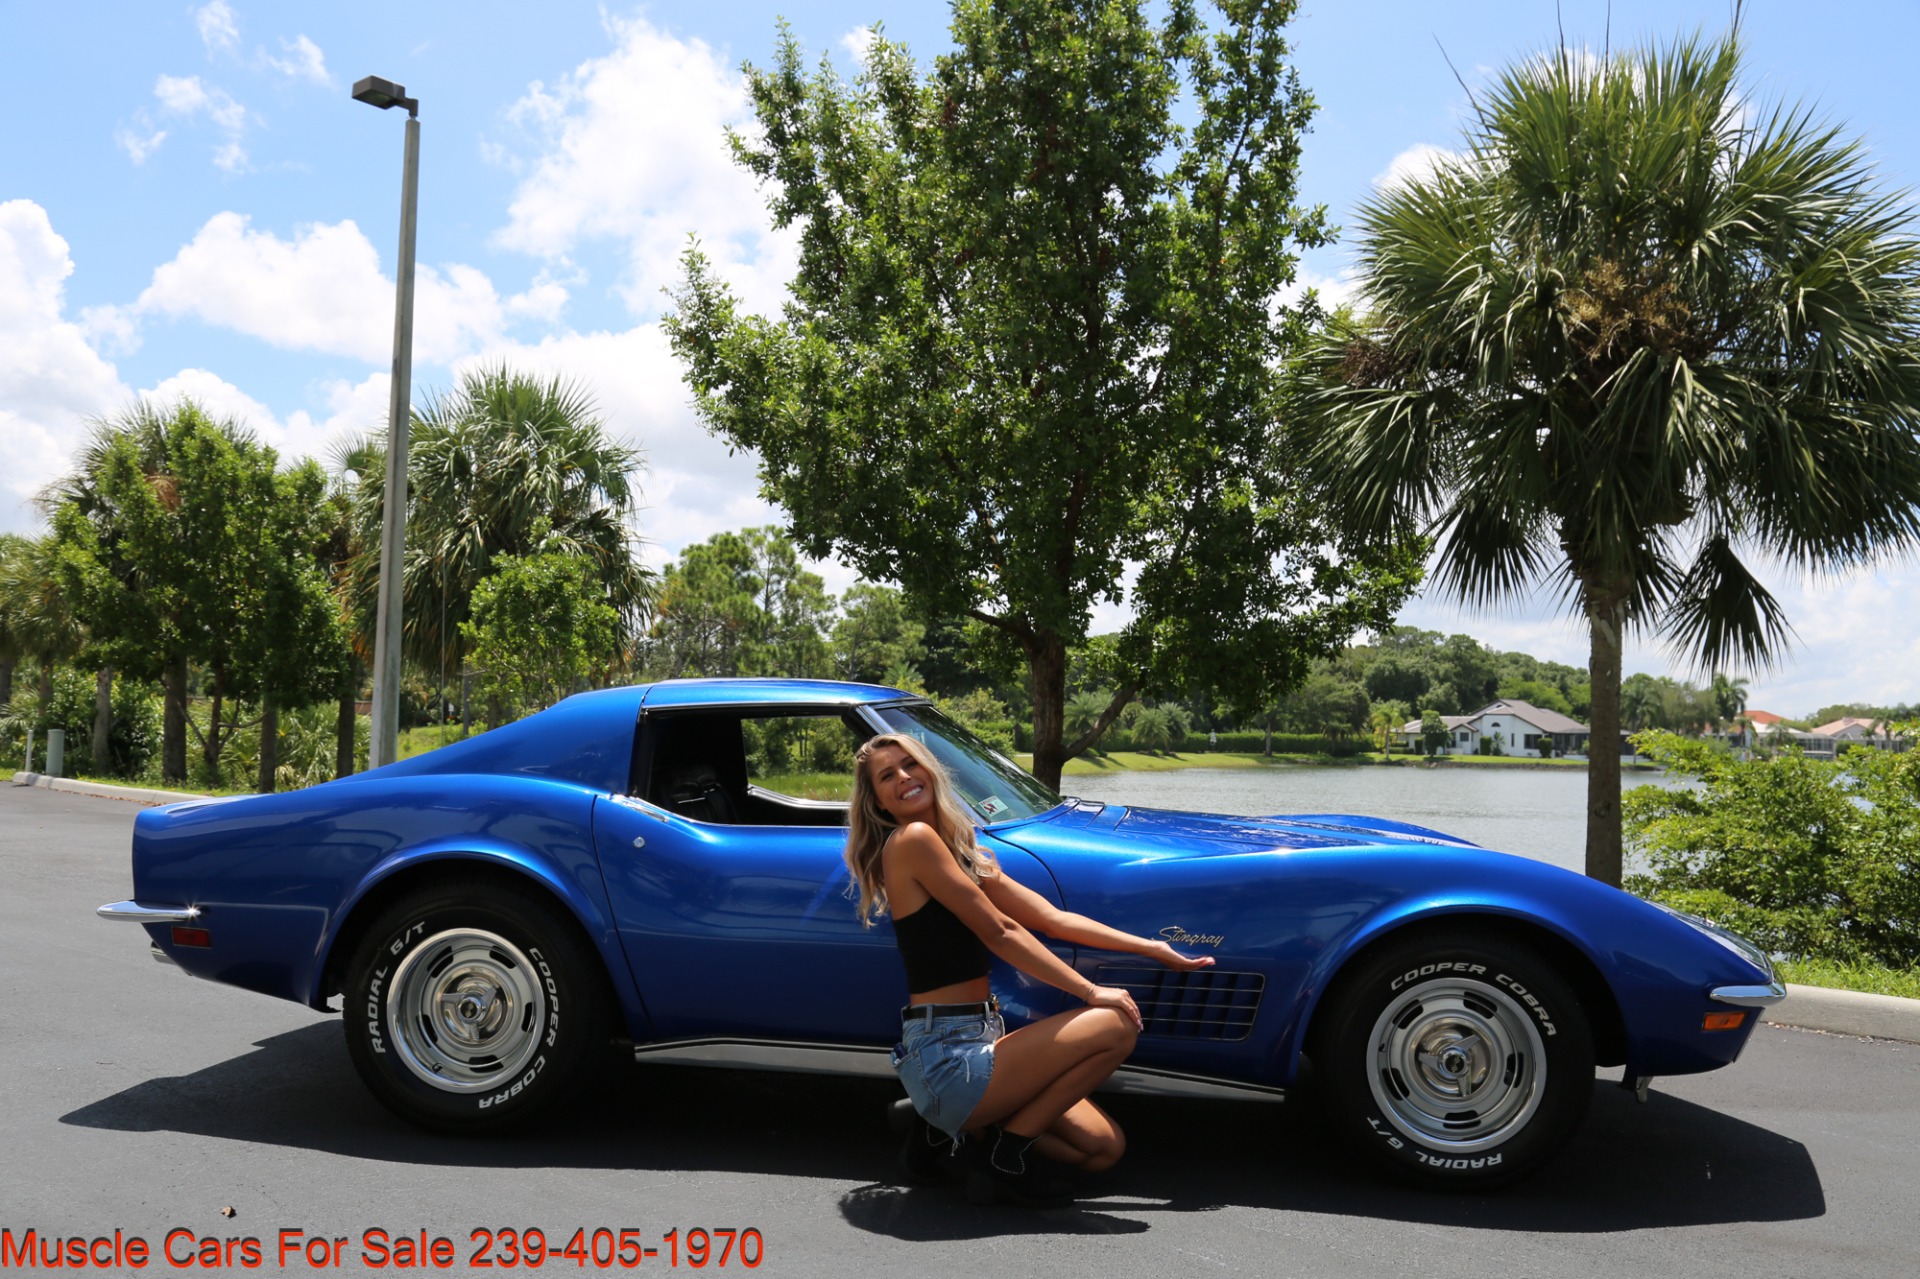 Used 1970 Chevrolet Corvette Stingray For Sale ($34,500) | Muscle Cars